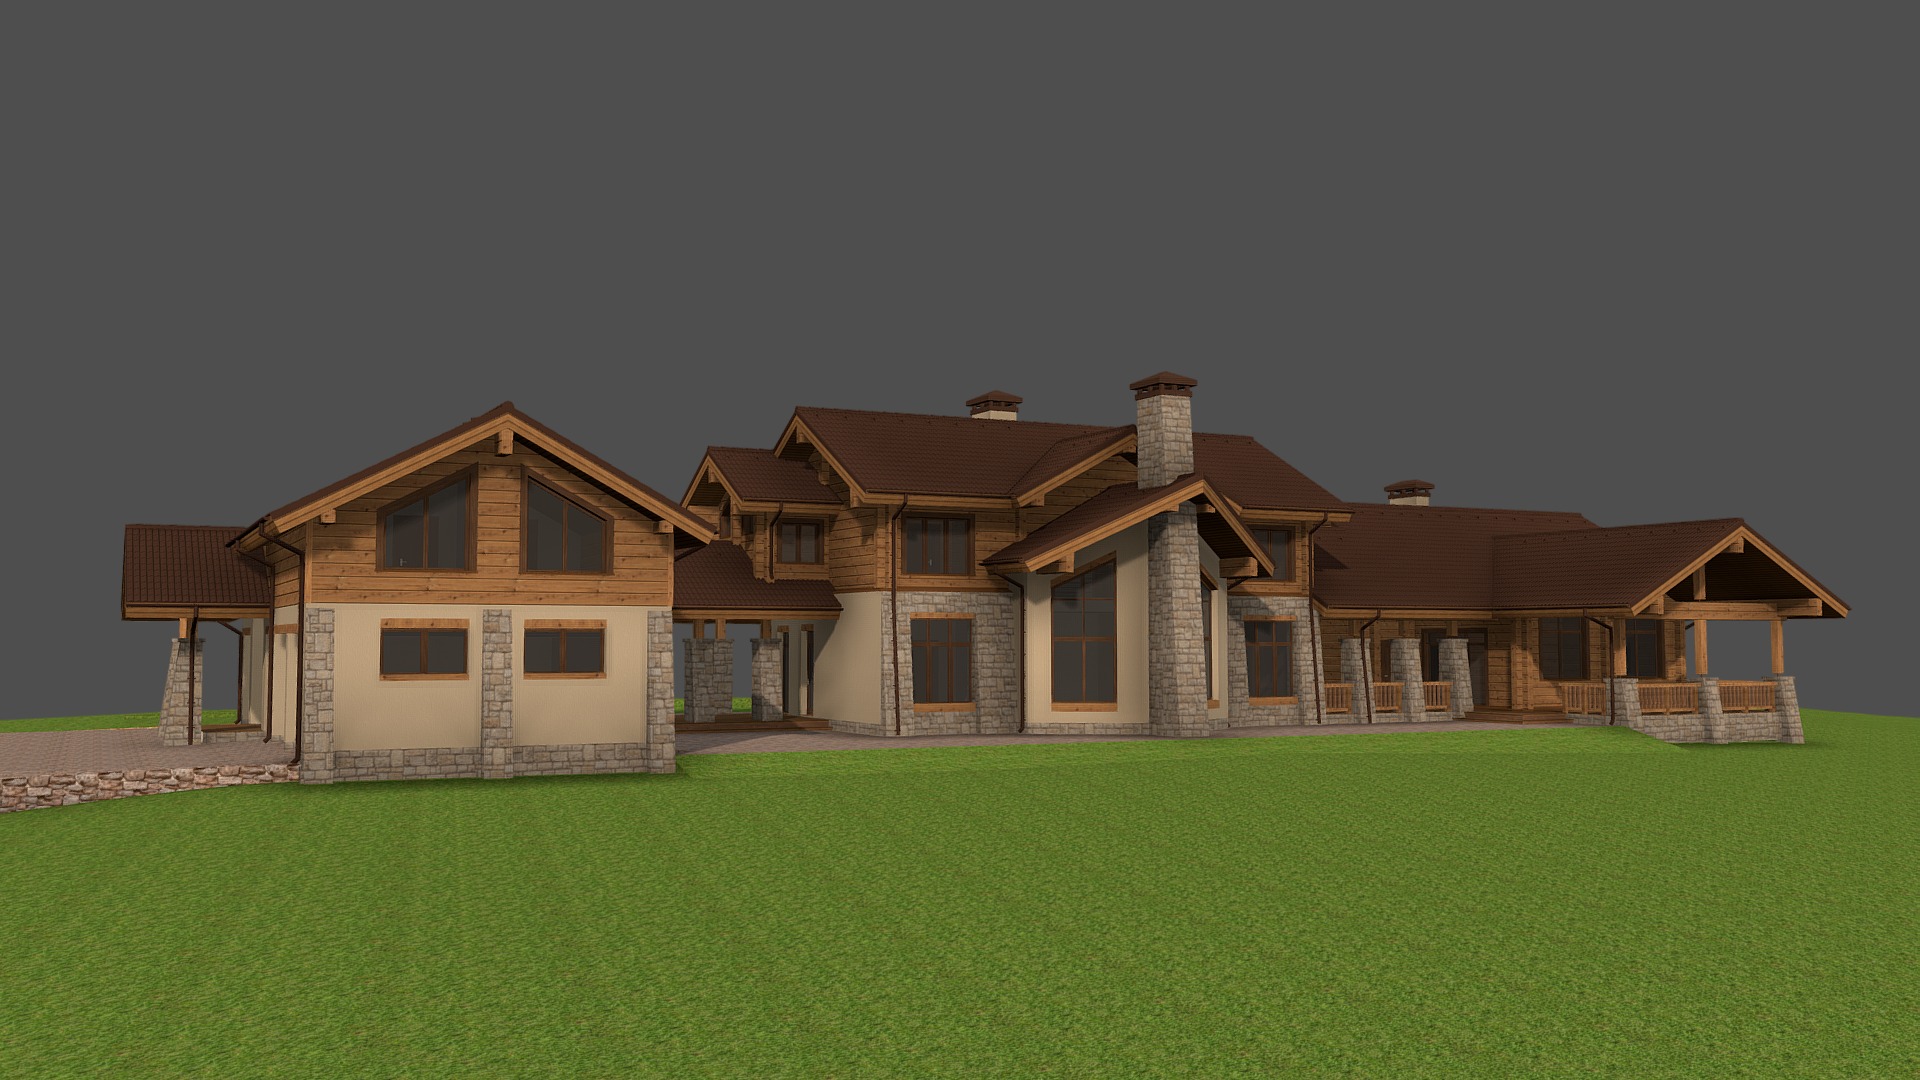 3D model Комплекс - This is a 3D model of the Комплекс. The 3D model is about a row of houses.